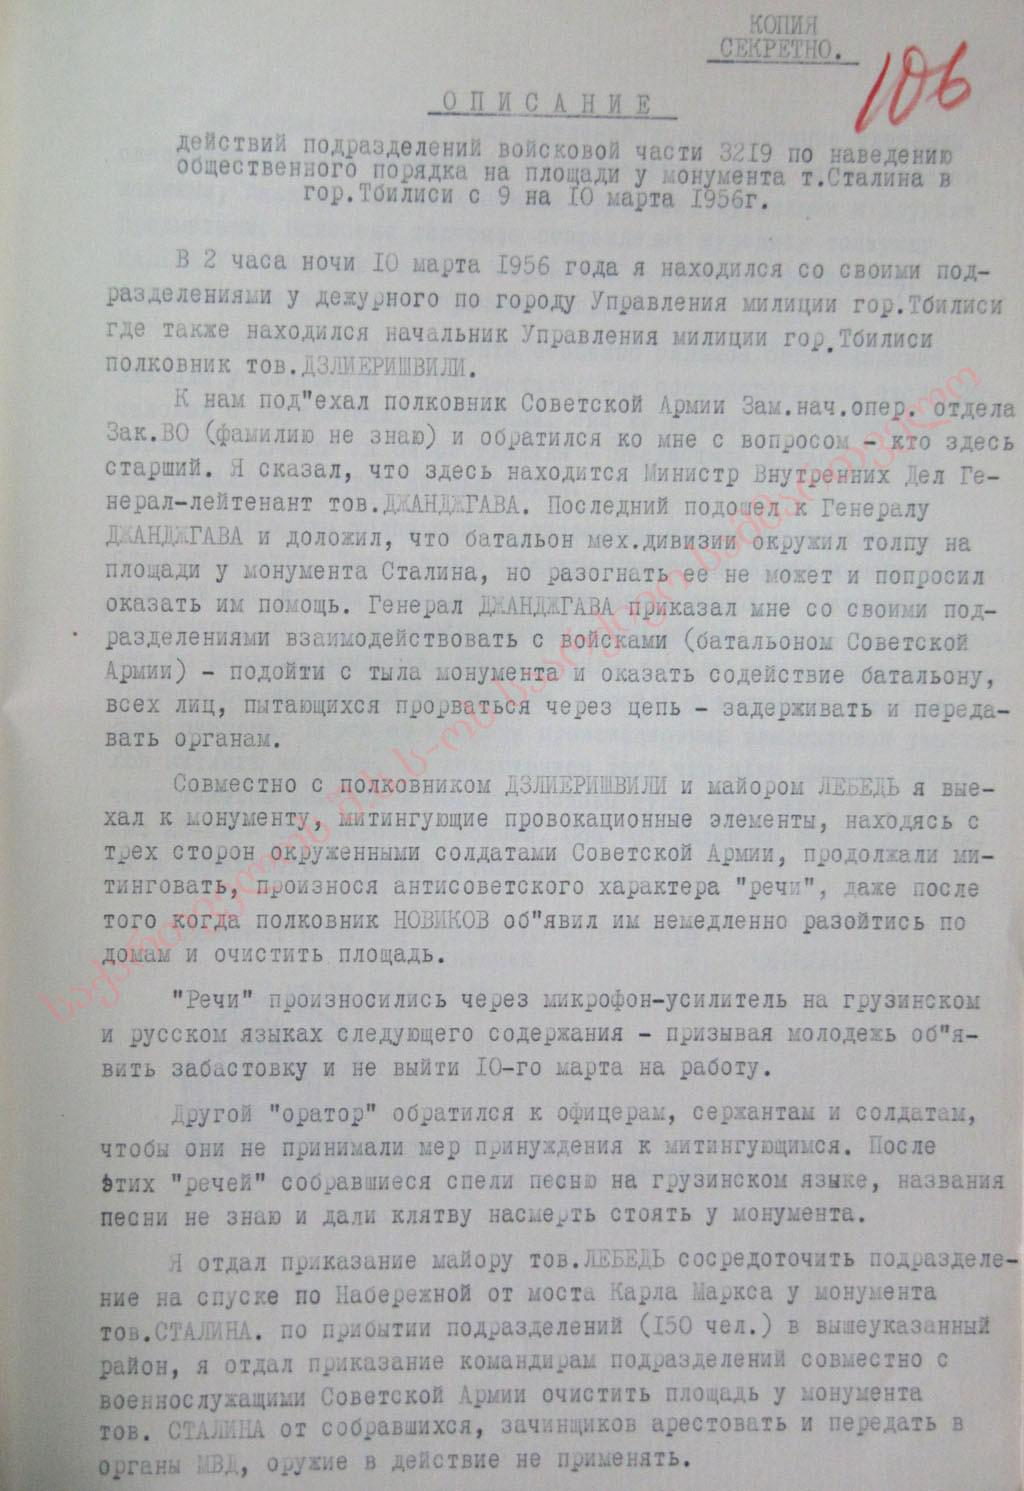 Details of the incident that happened by the pedestal of the statue of I.B. Stalin on March 9-10th. April 6th, 1956. The Report of Colonel Chernikov